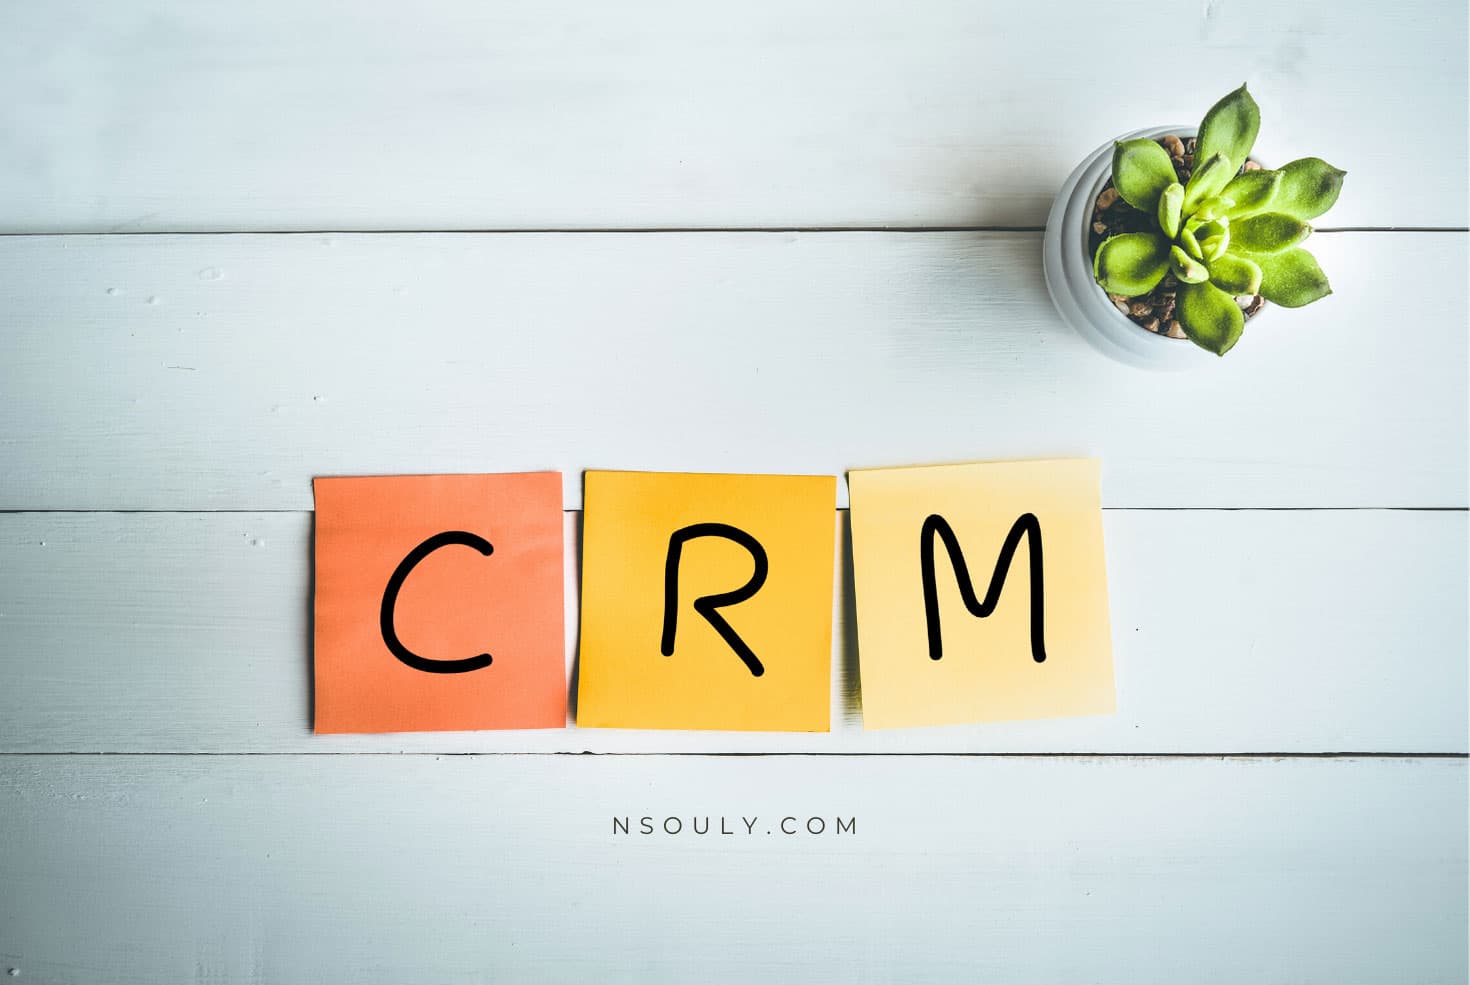 Best CRM Softwares for Small Businesses